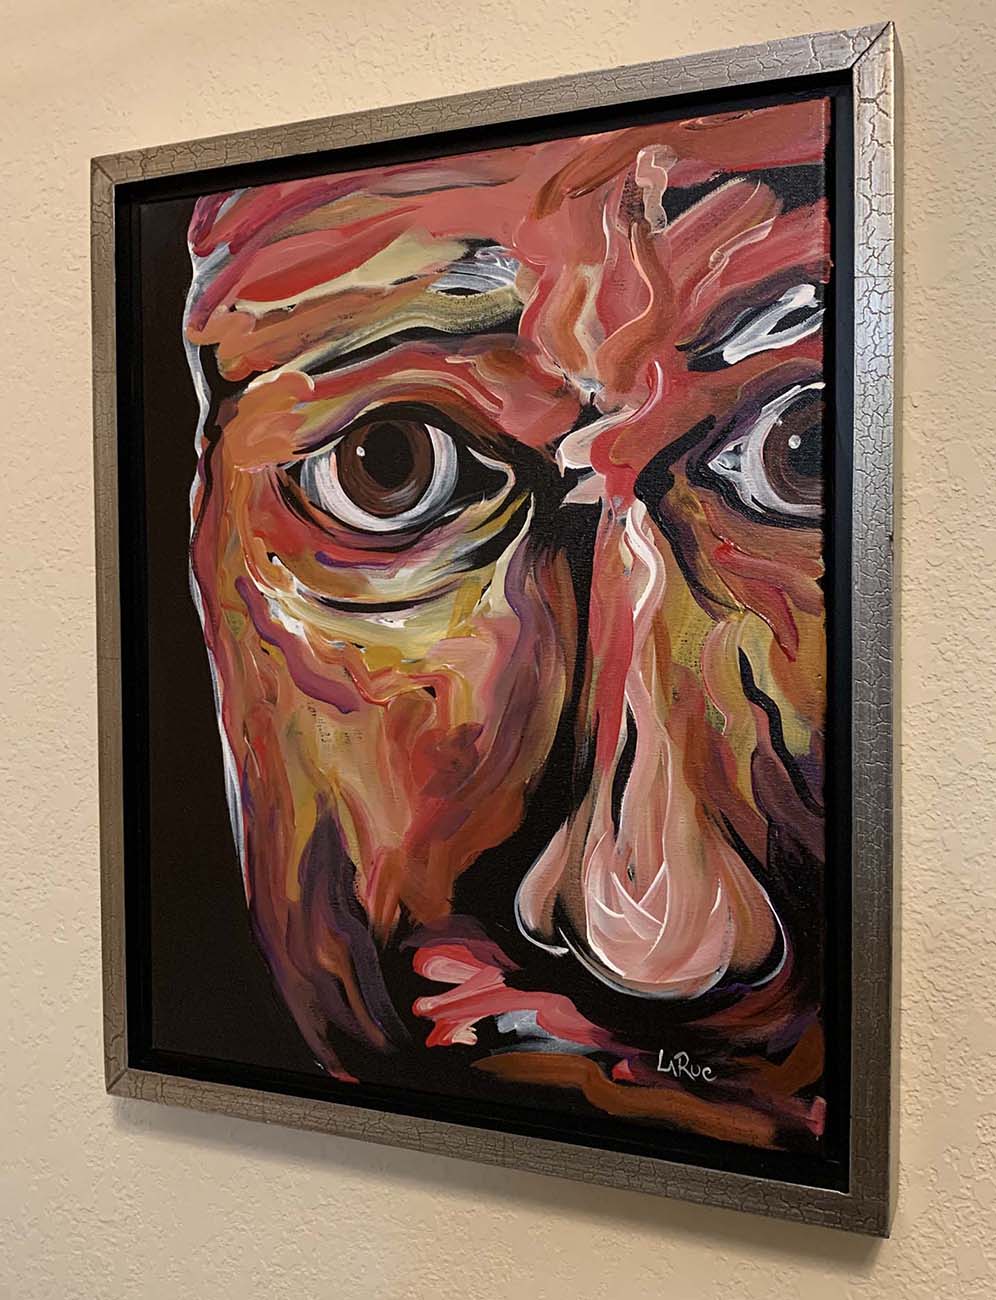 Lawrence is a figurative abstract portrait painting by Doug LaRue in a gold floater frame